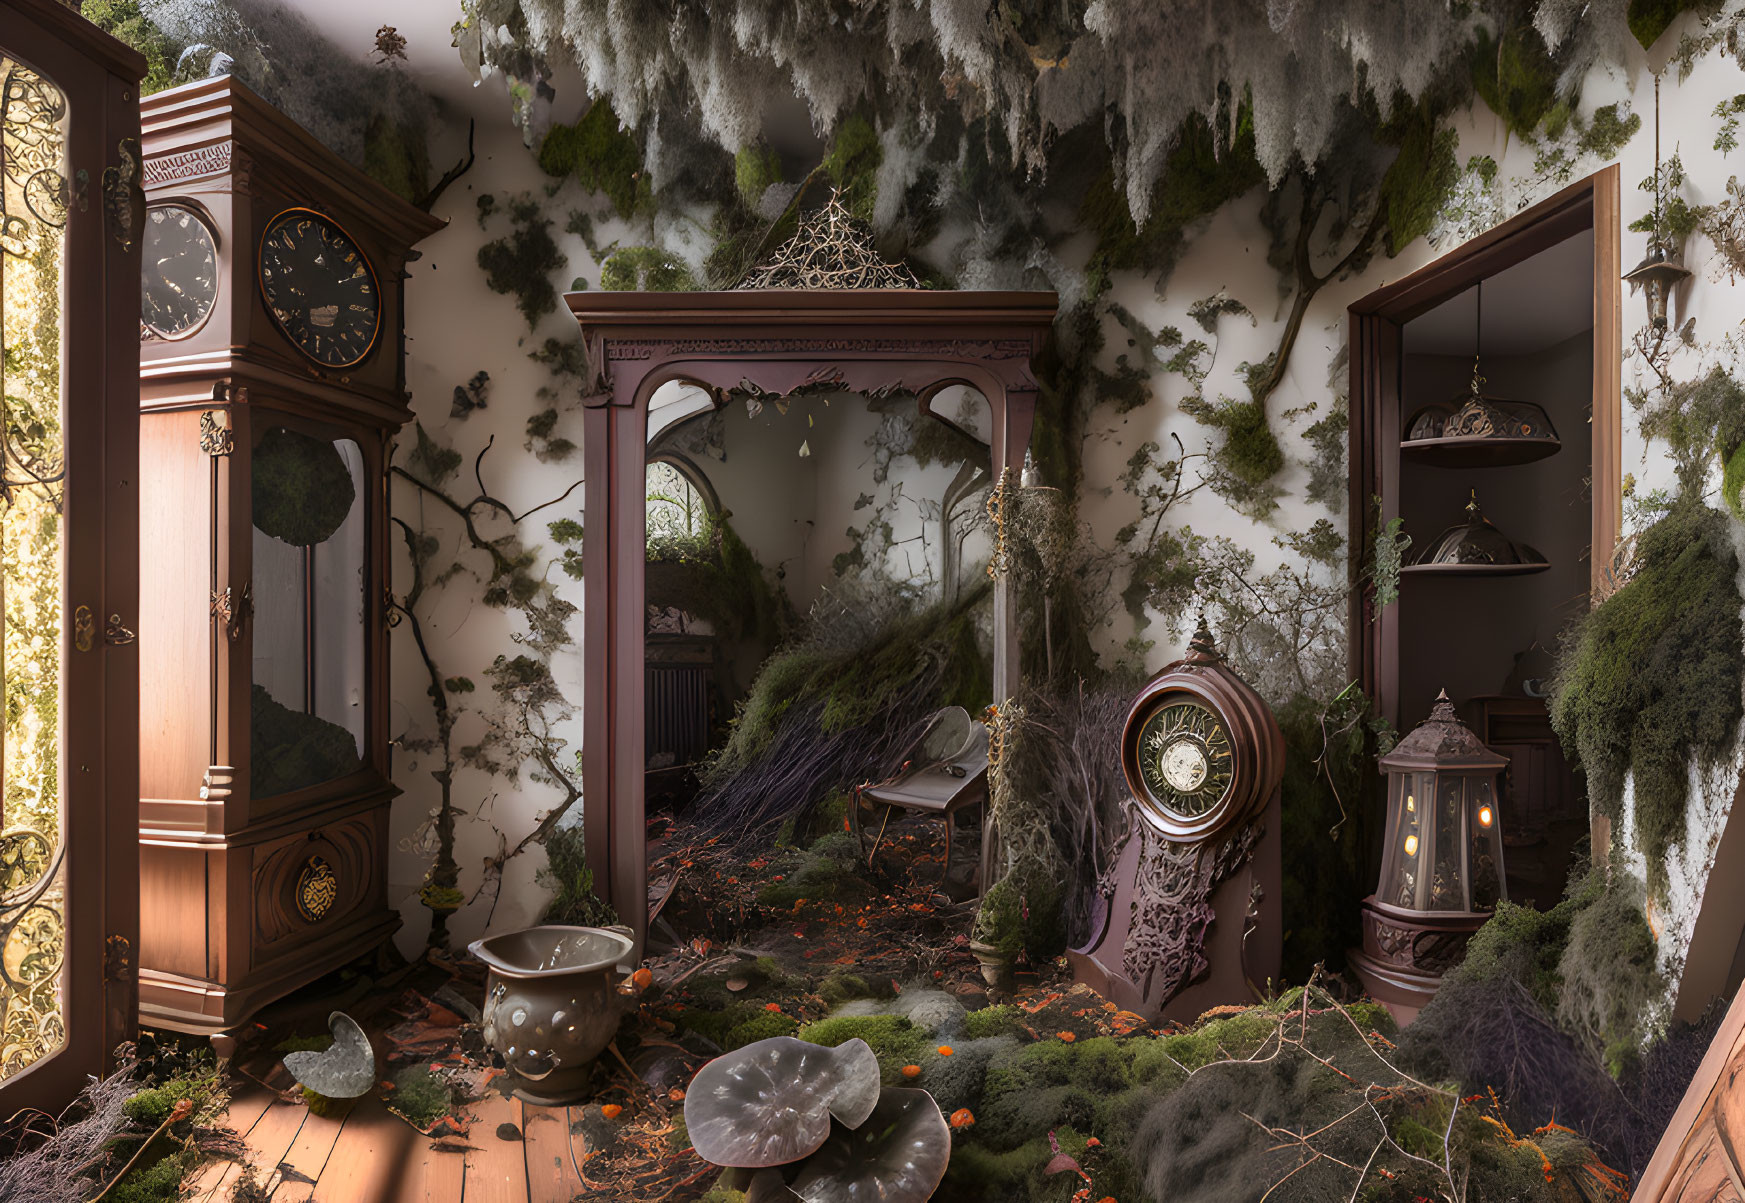 Vintage room with clocks, mirror, cobwebs, and moss - mystical ambiance